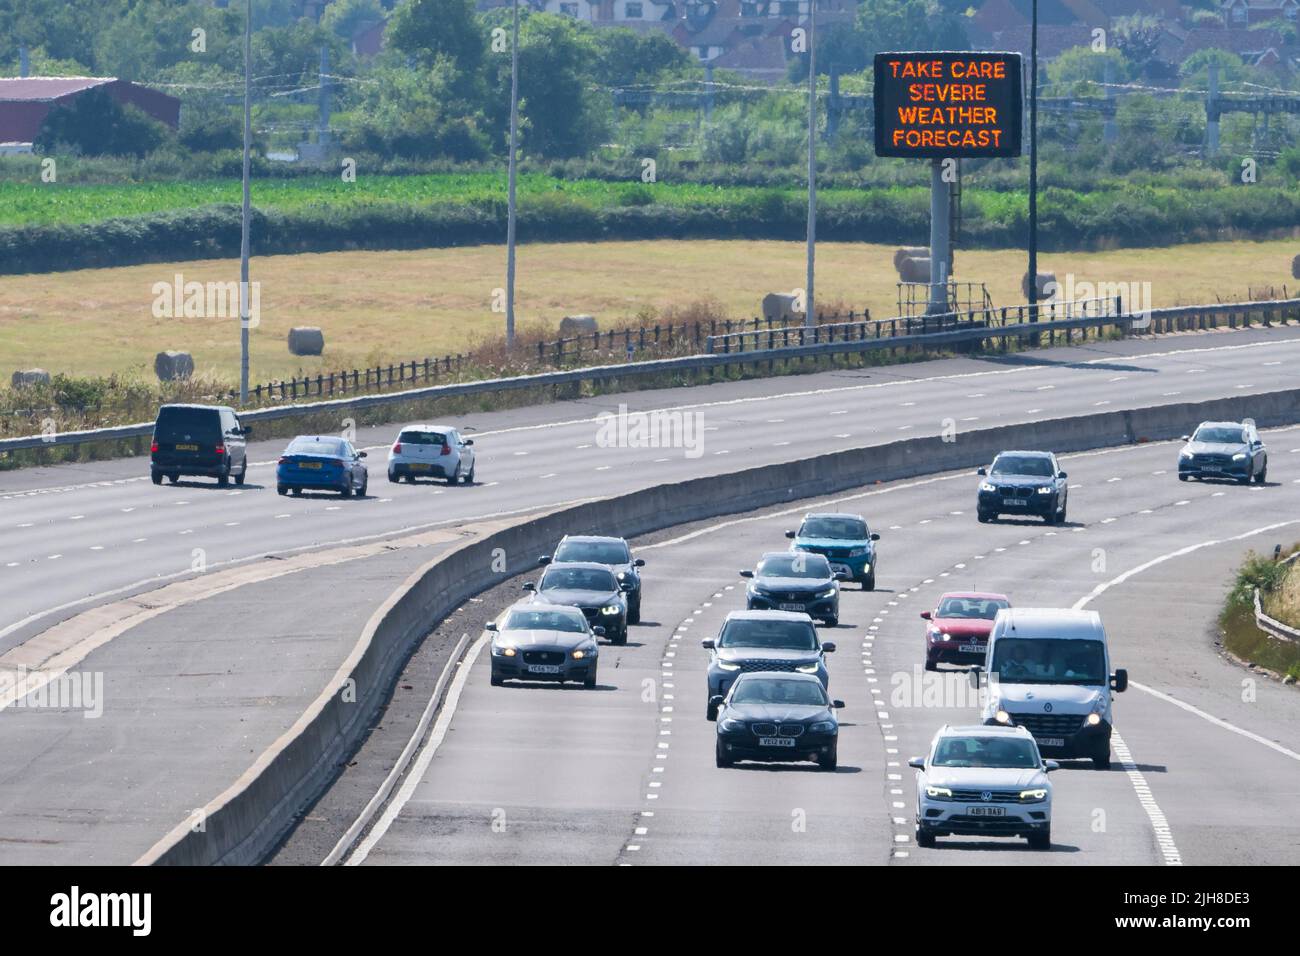 ROGIET, WALES - JULY 16: A sign on the M4 warns motorists to take care due to the severe weather forecast on July 16, 2022 in Rogiet, Wales. For the f Stock Photo